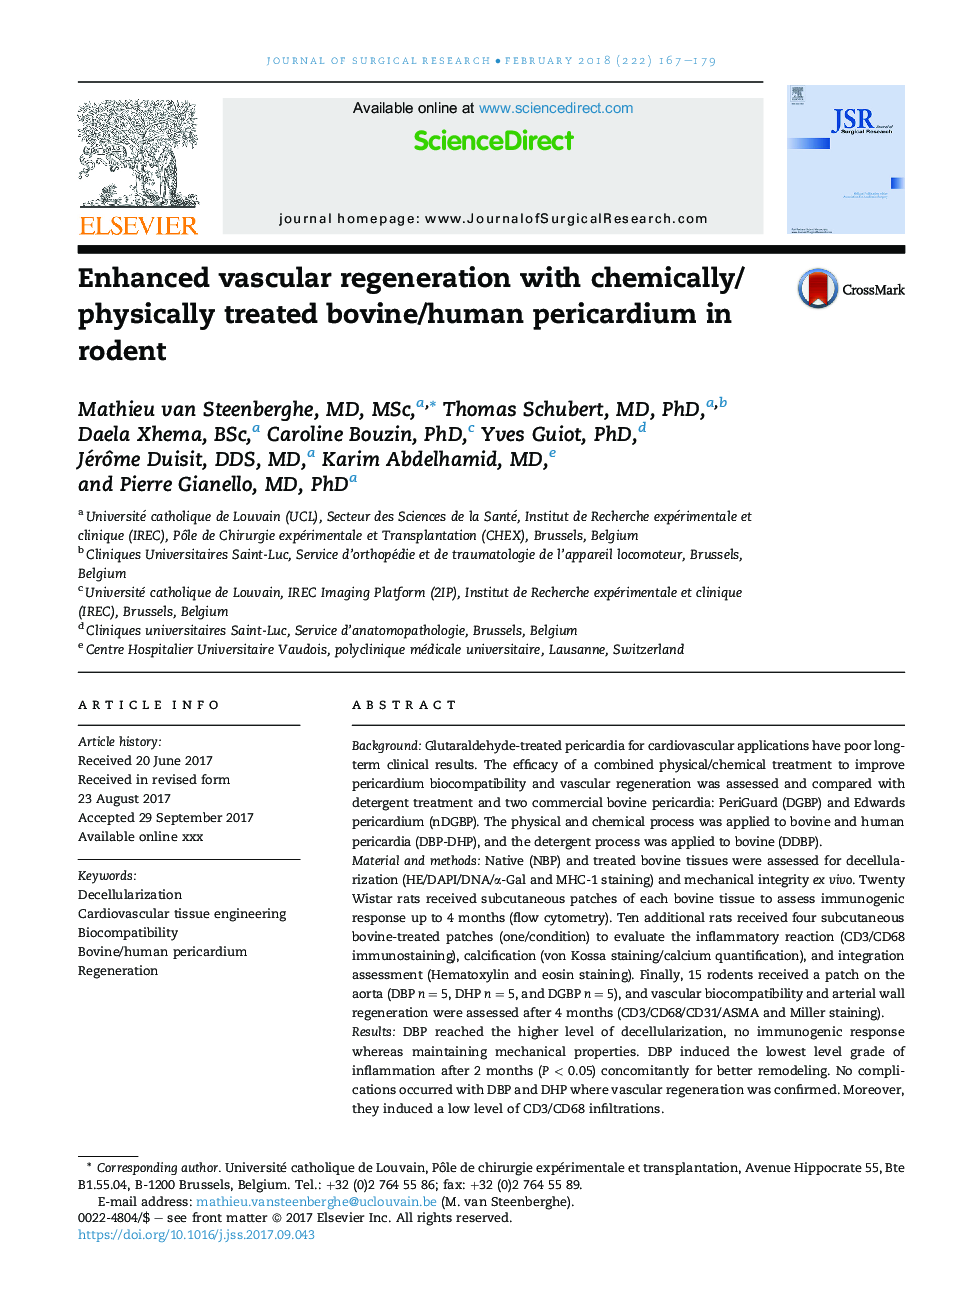 Enhanced vascular regeneration with chemically/physically treated bovine/human pericardium in rodents